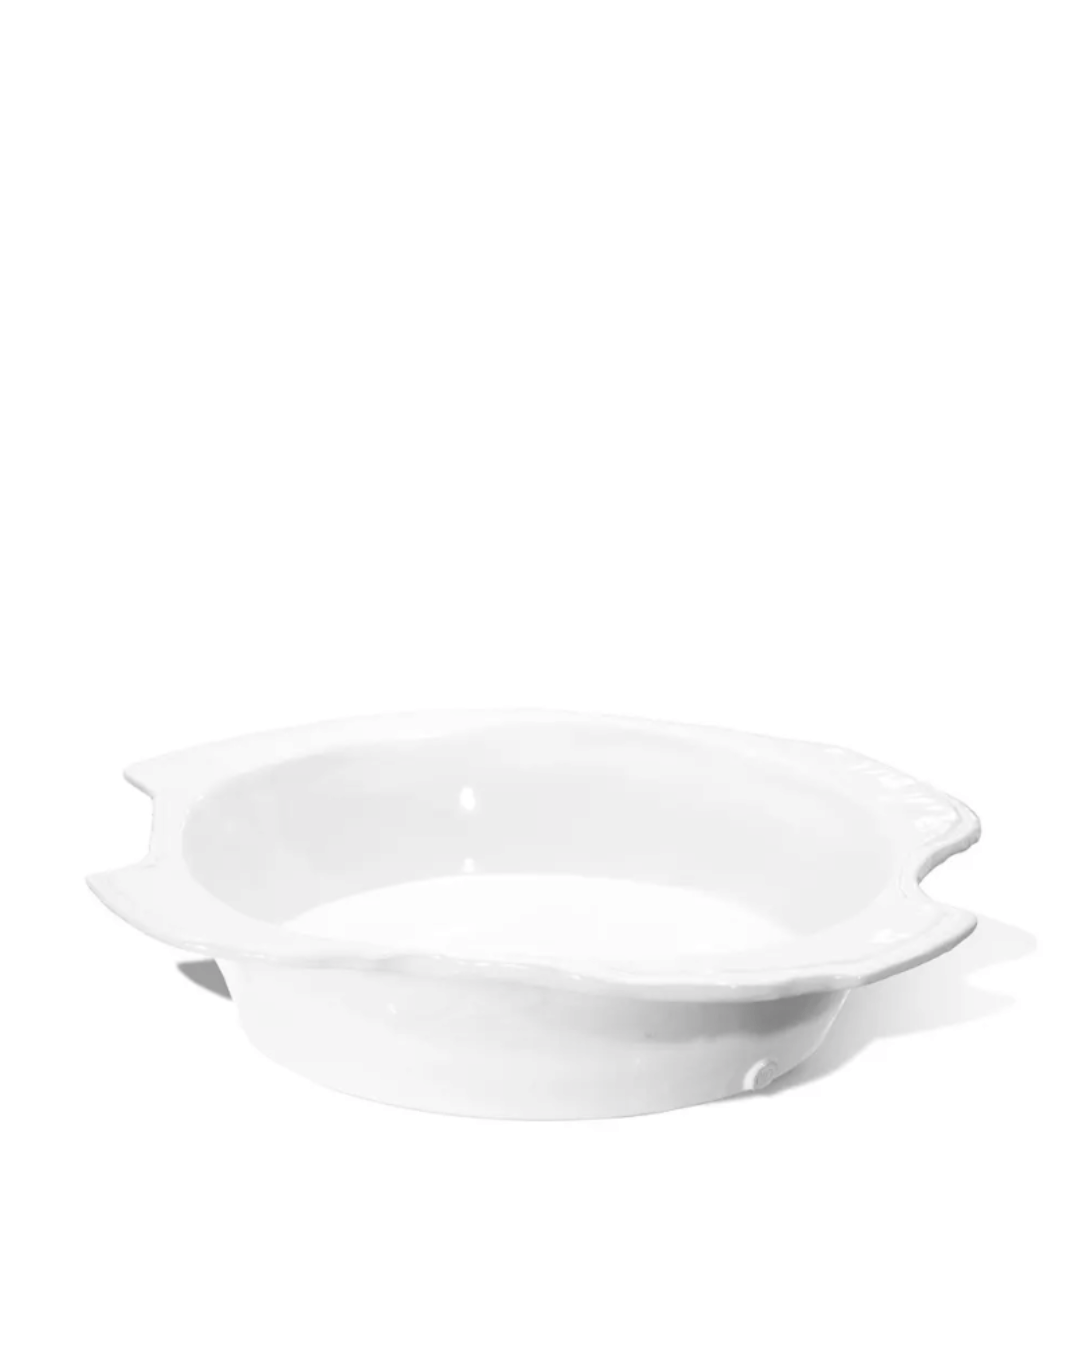 A white ceramic pie dish with fluted edges, displayed on a plain white background, emphasizing its simple and elegant bungalow-inspired design by Montes Doggett.